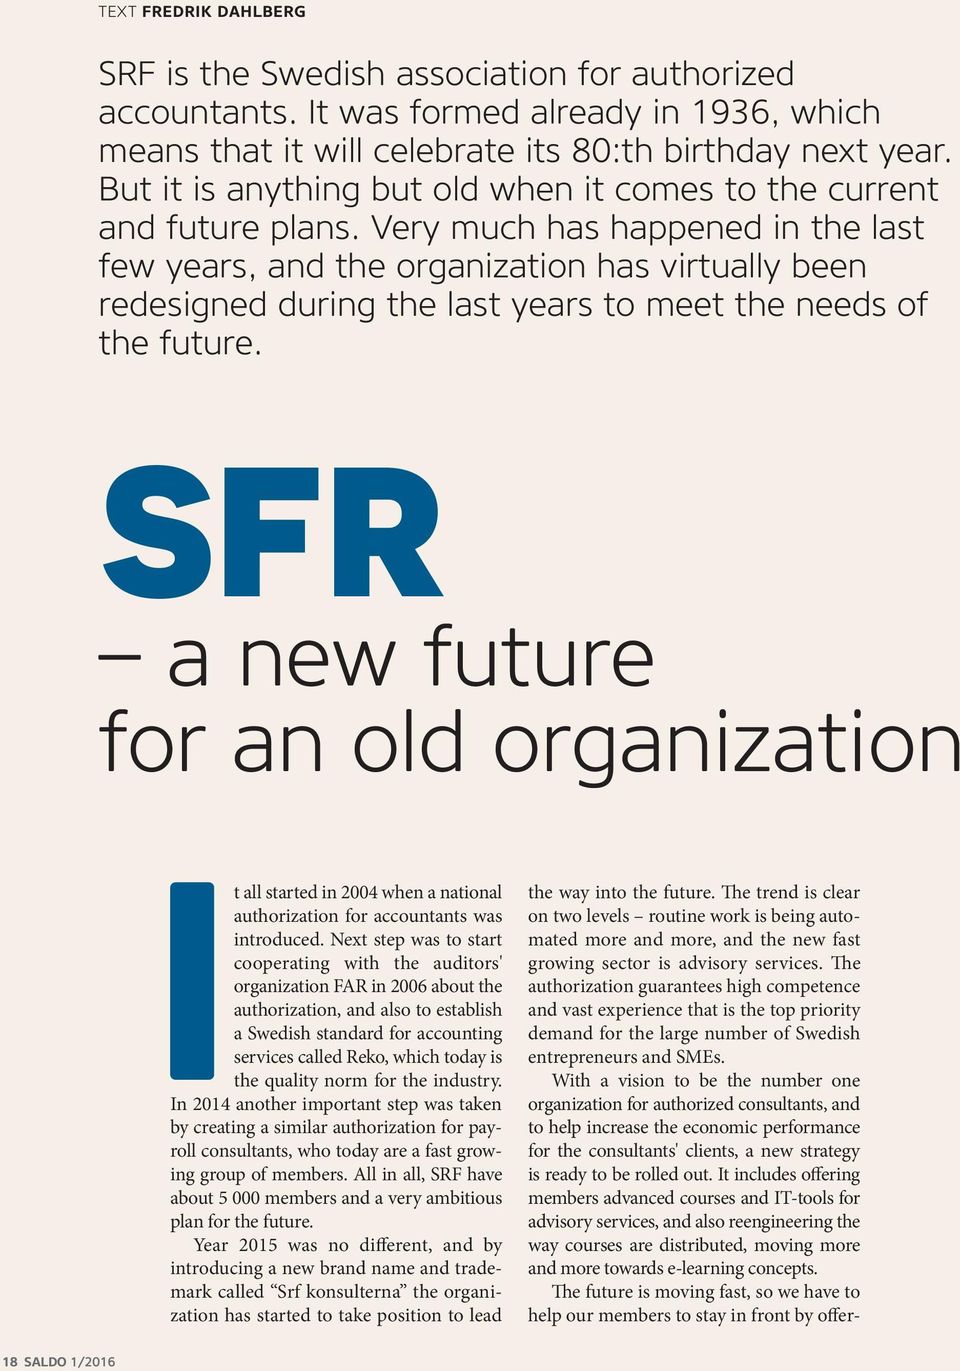 Very much has happened in the last few years, and the organization has virtually been redesigned during the last years to meet the needs of the future.